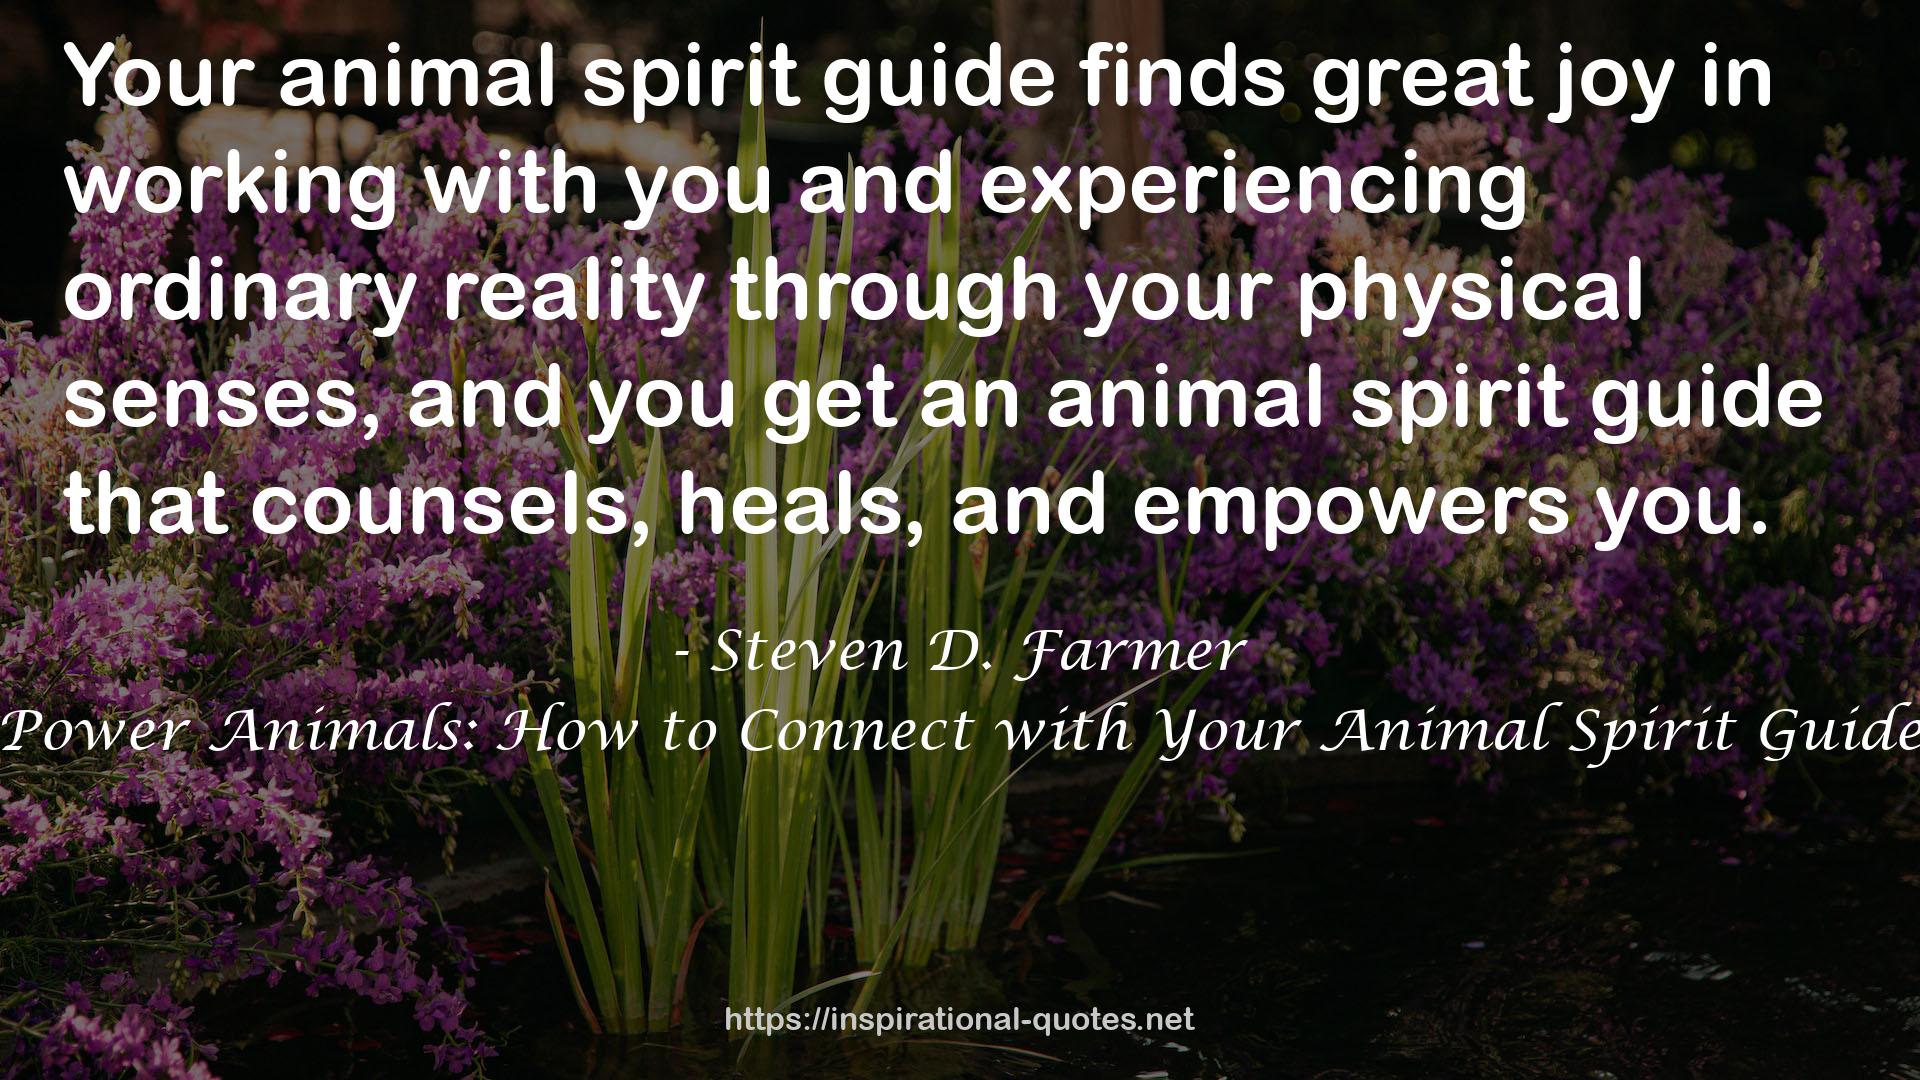 Power Animals: How to Connect with Your Animal Spirit Guide QUOTES